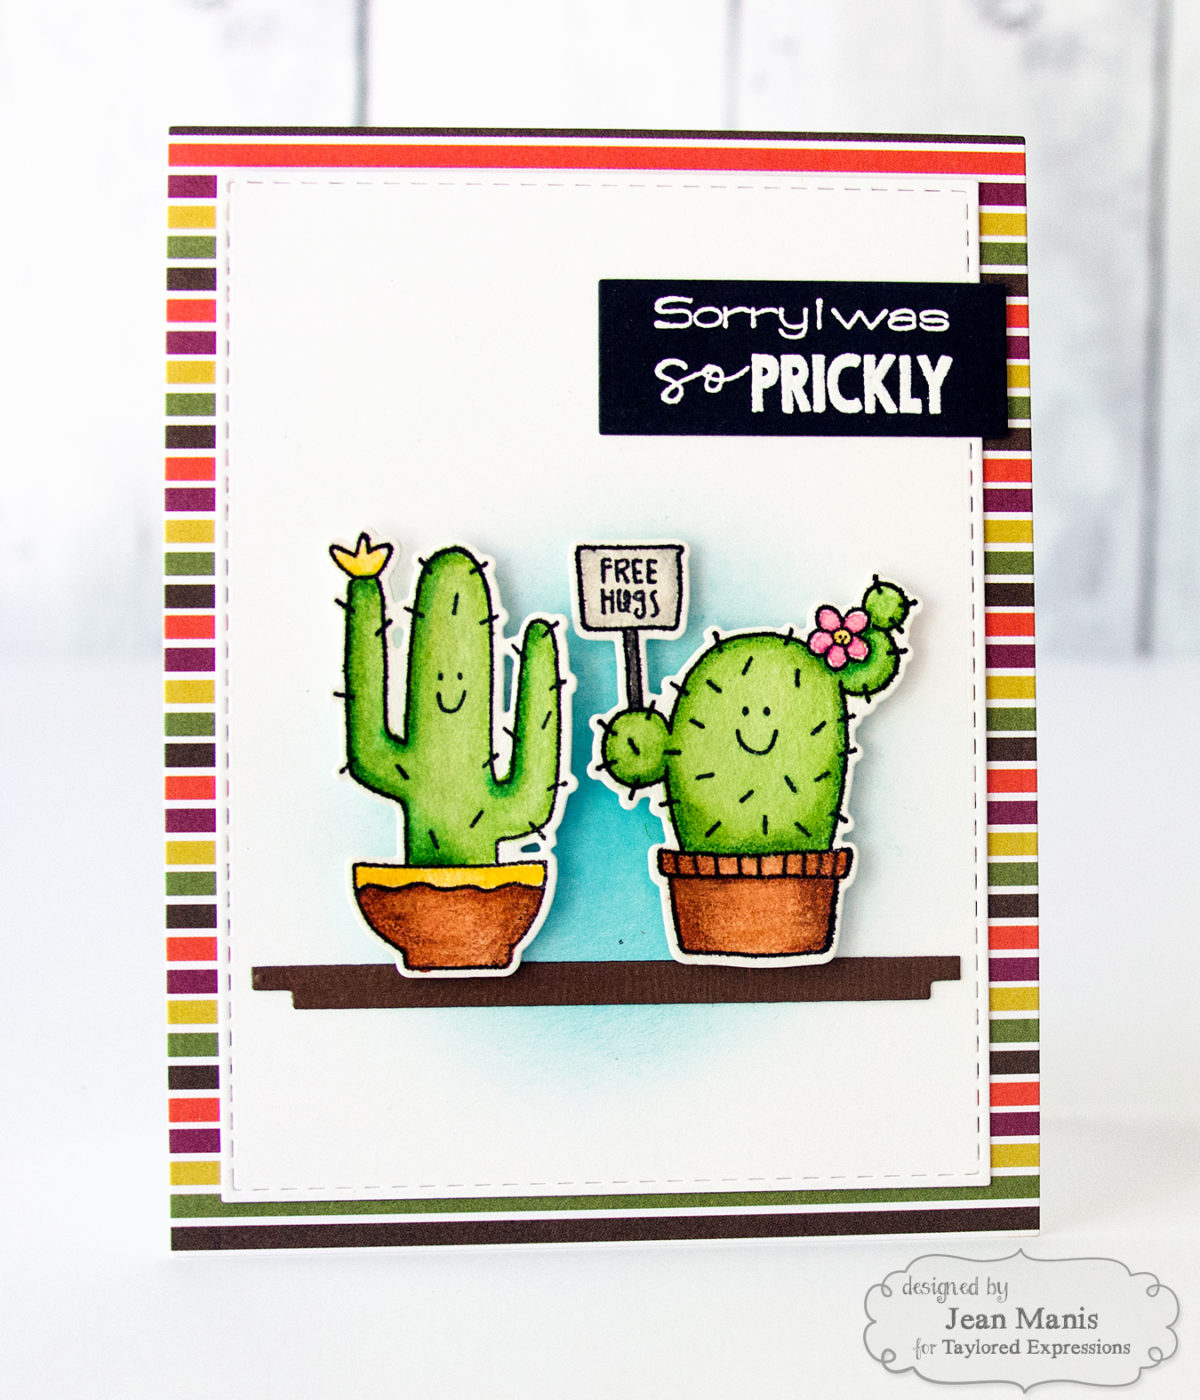 Taylored Expressions – Cactus Apology Card